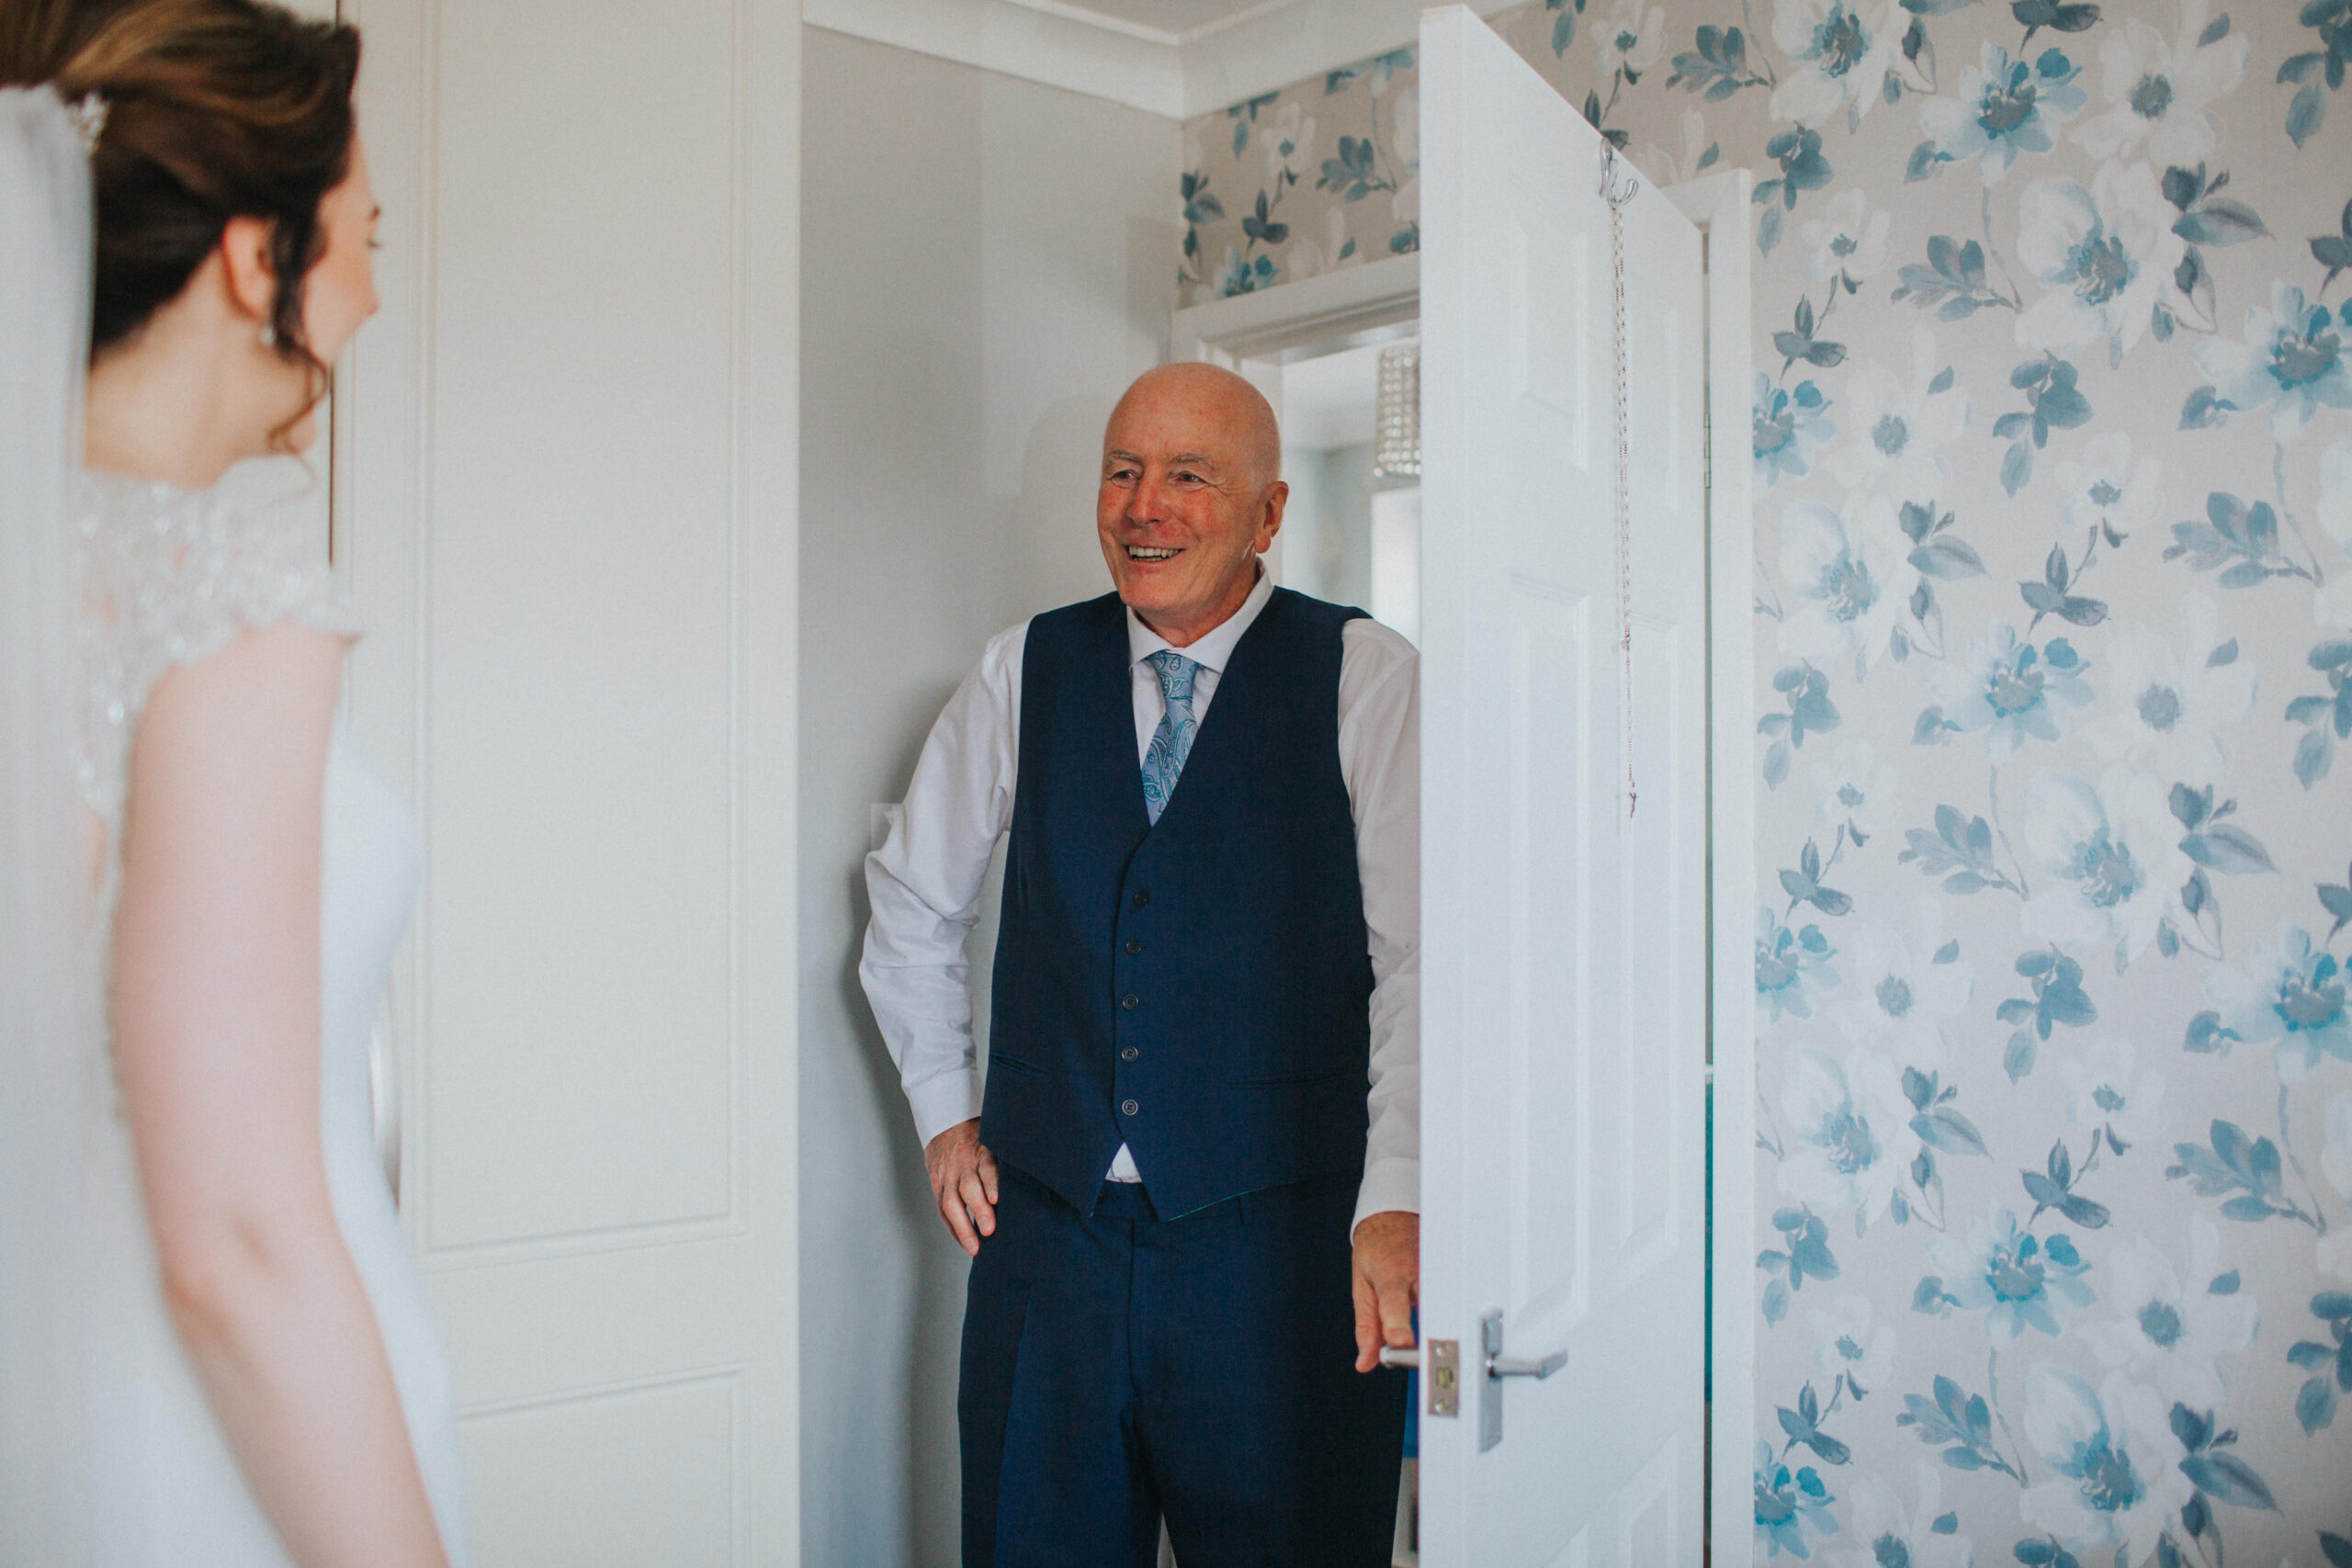 bride's dad seeing bride in dress for first time